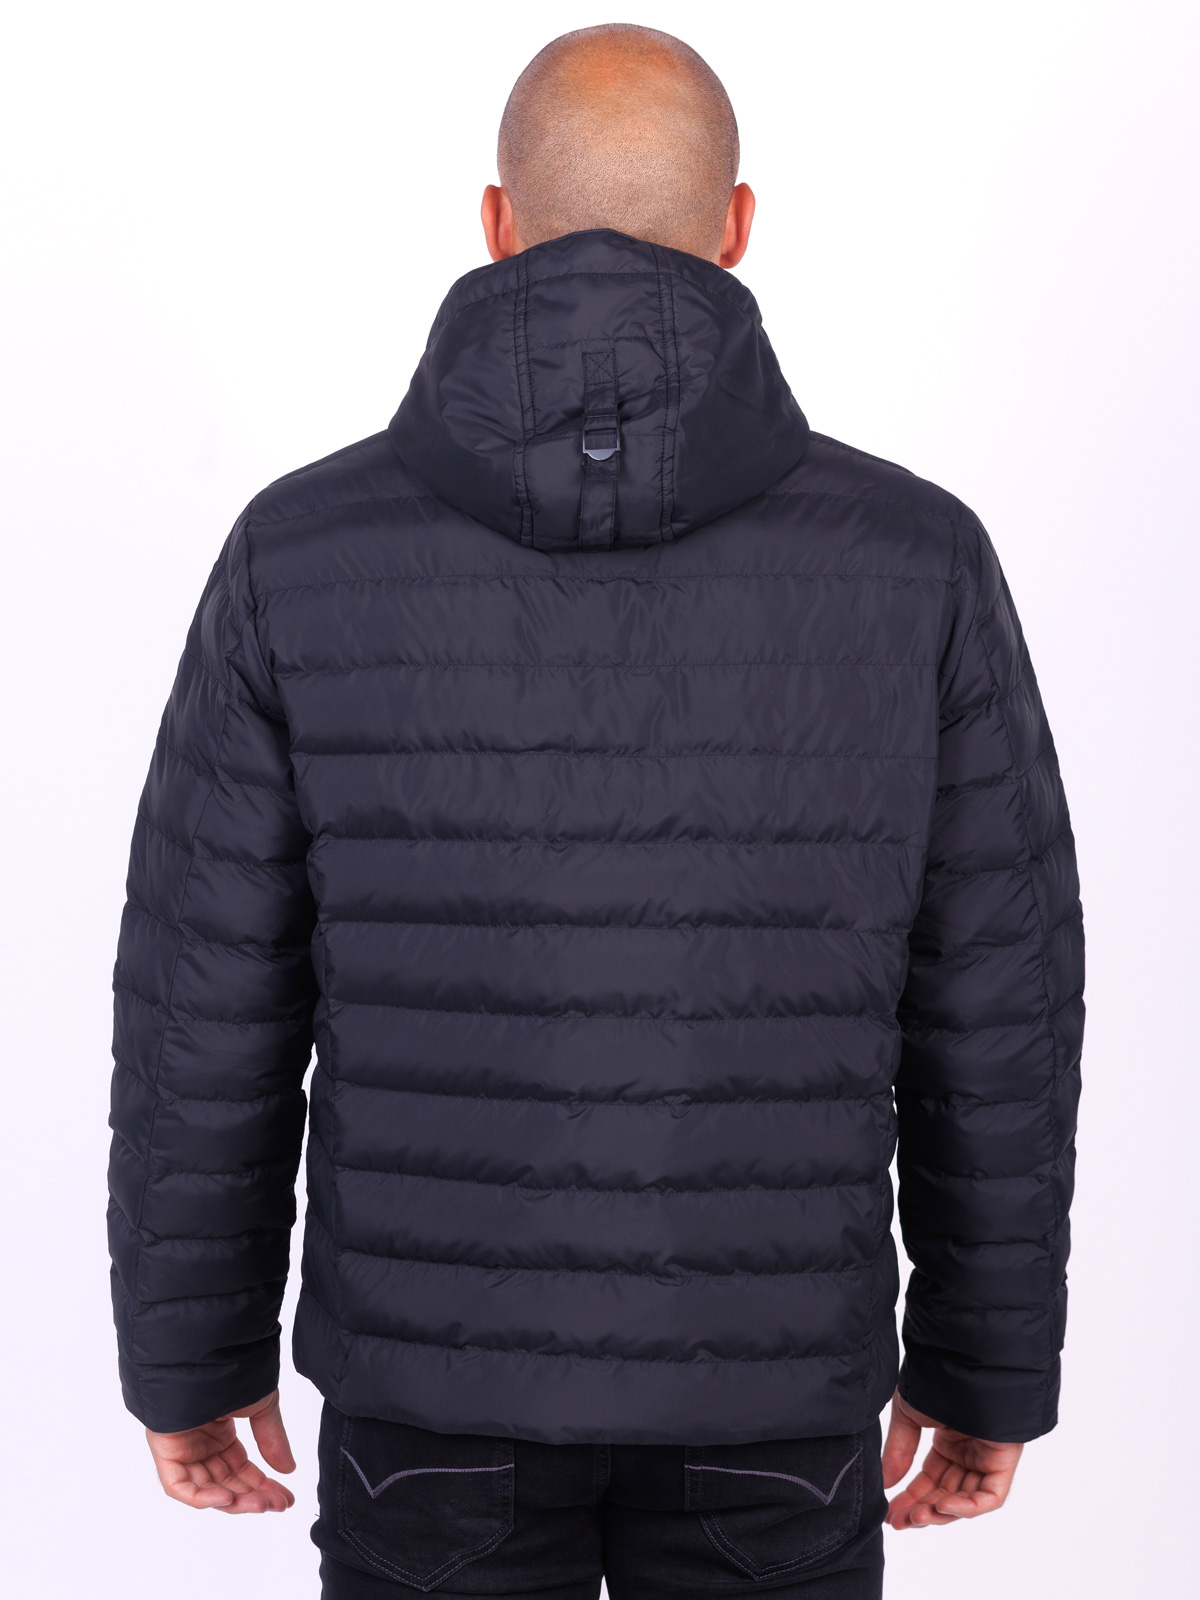 Black quilted jacket with hood - 65116 € 100.67 img2